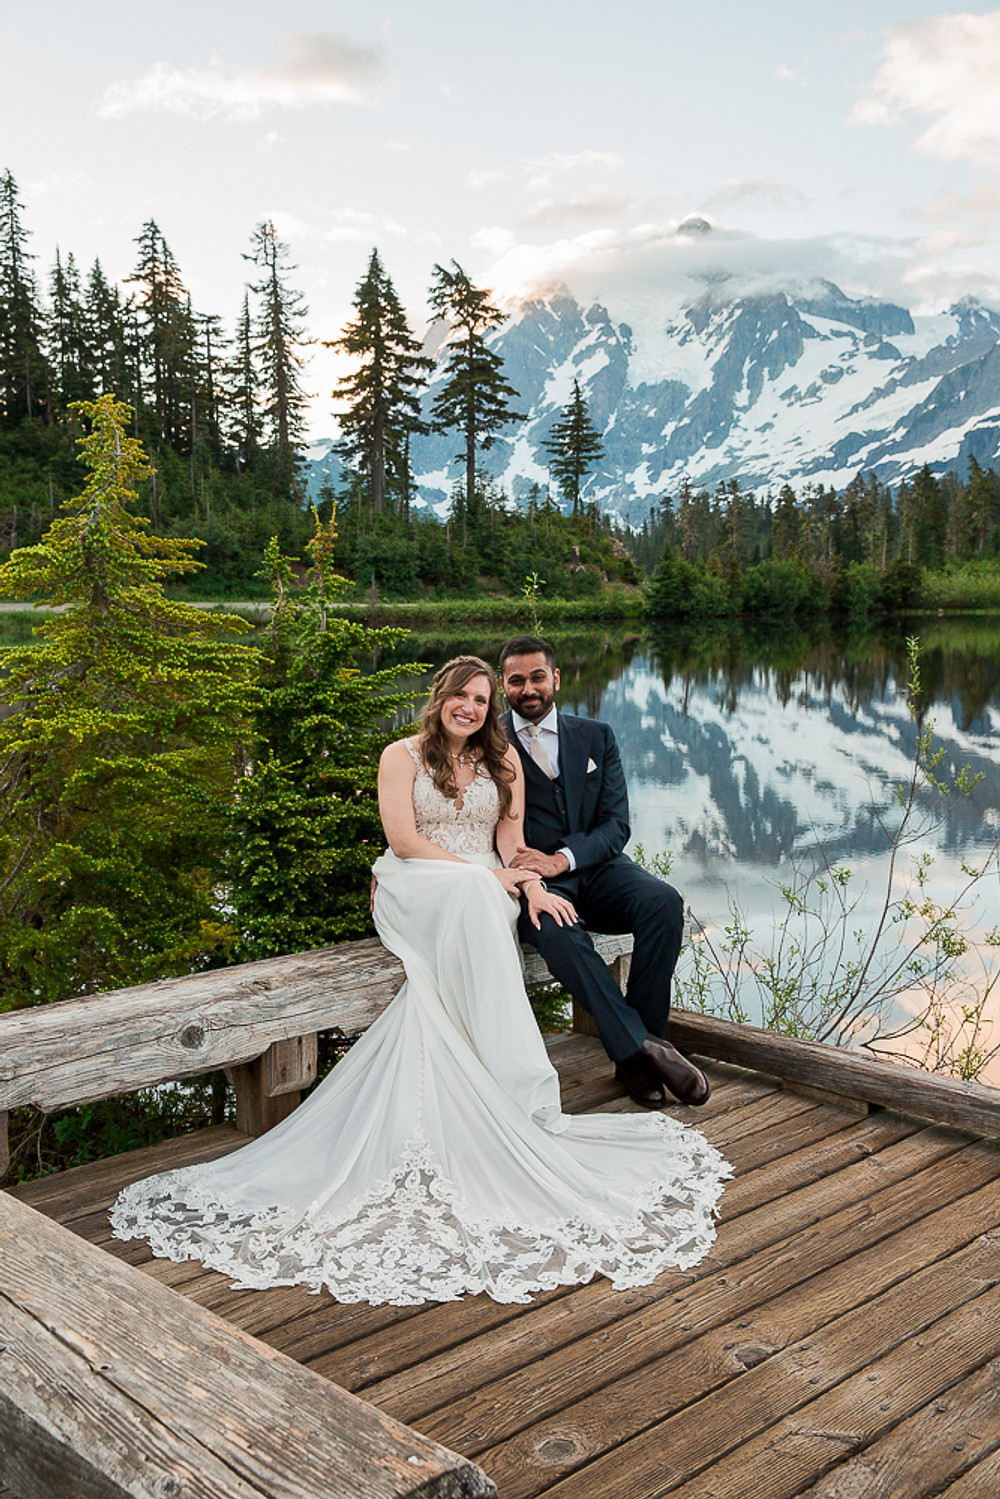 A multicultural couple says "I do" at Mt. Baker in their stunning adventure elopement at sunrise 